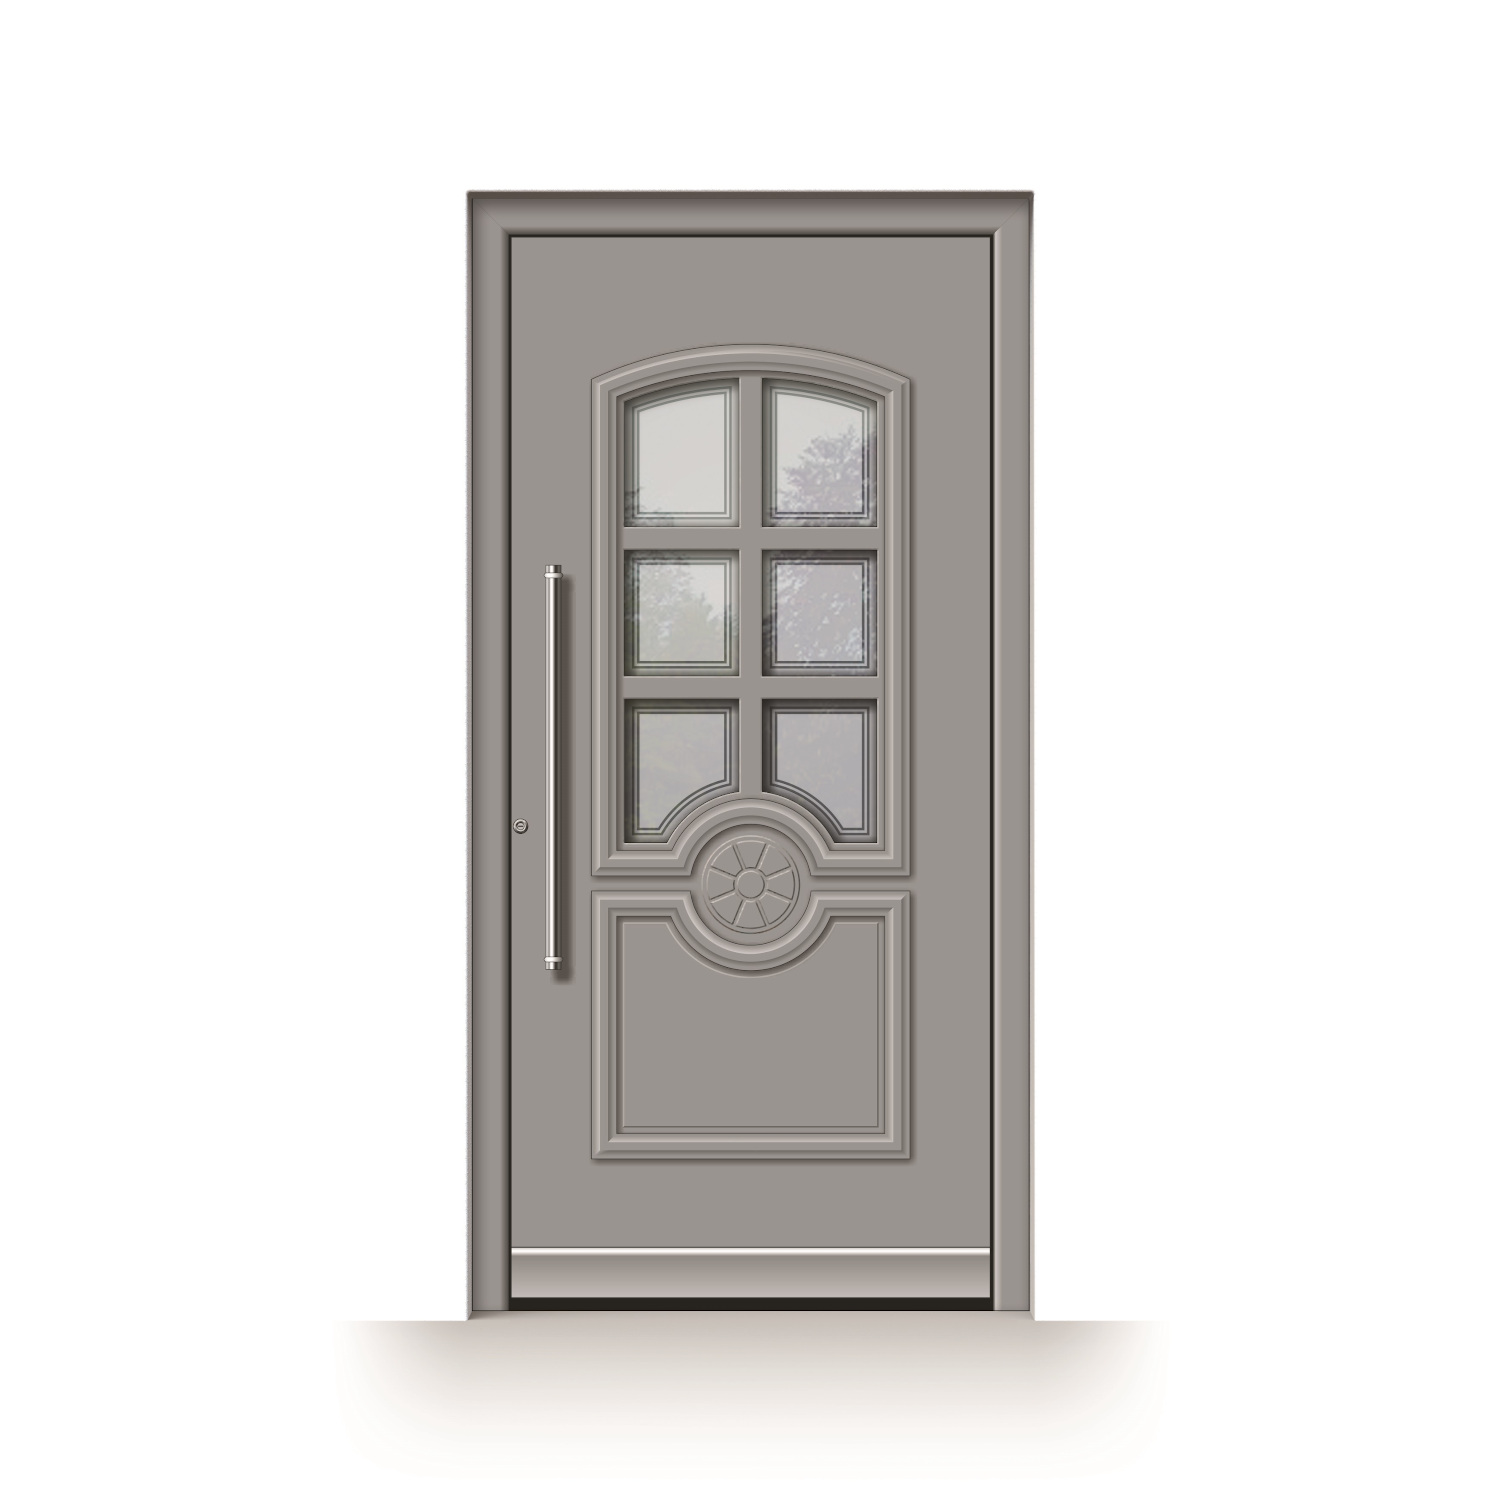 Front door model Guelph with decorative millwork